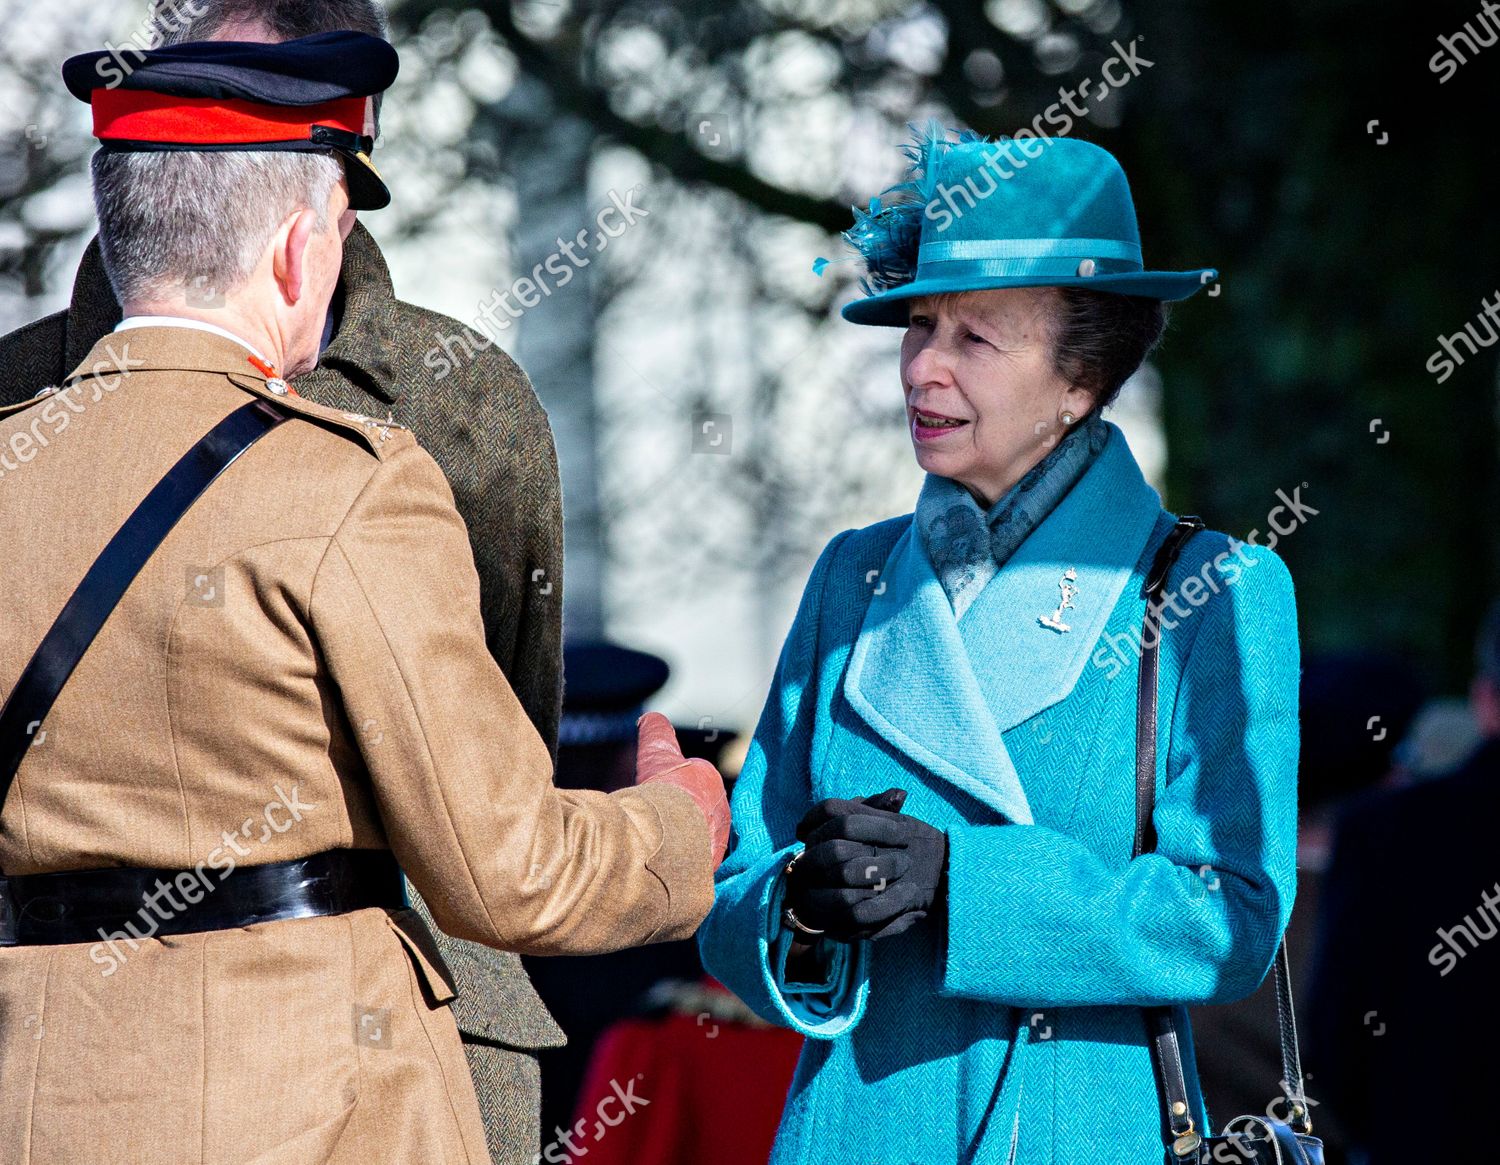 princess-anne-attends-the-royal-corps-of-signals-centenary-service-salisbury-cathedral-wiltshire-uk-shutterstock-editorial-10570519v.jpg